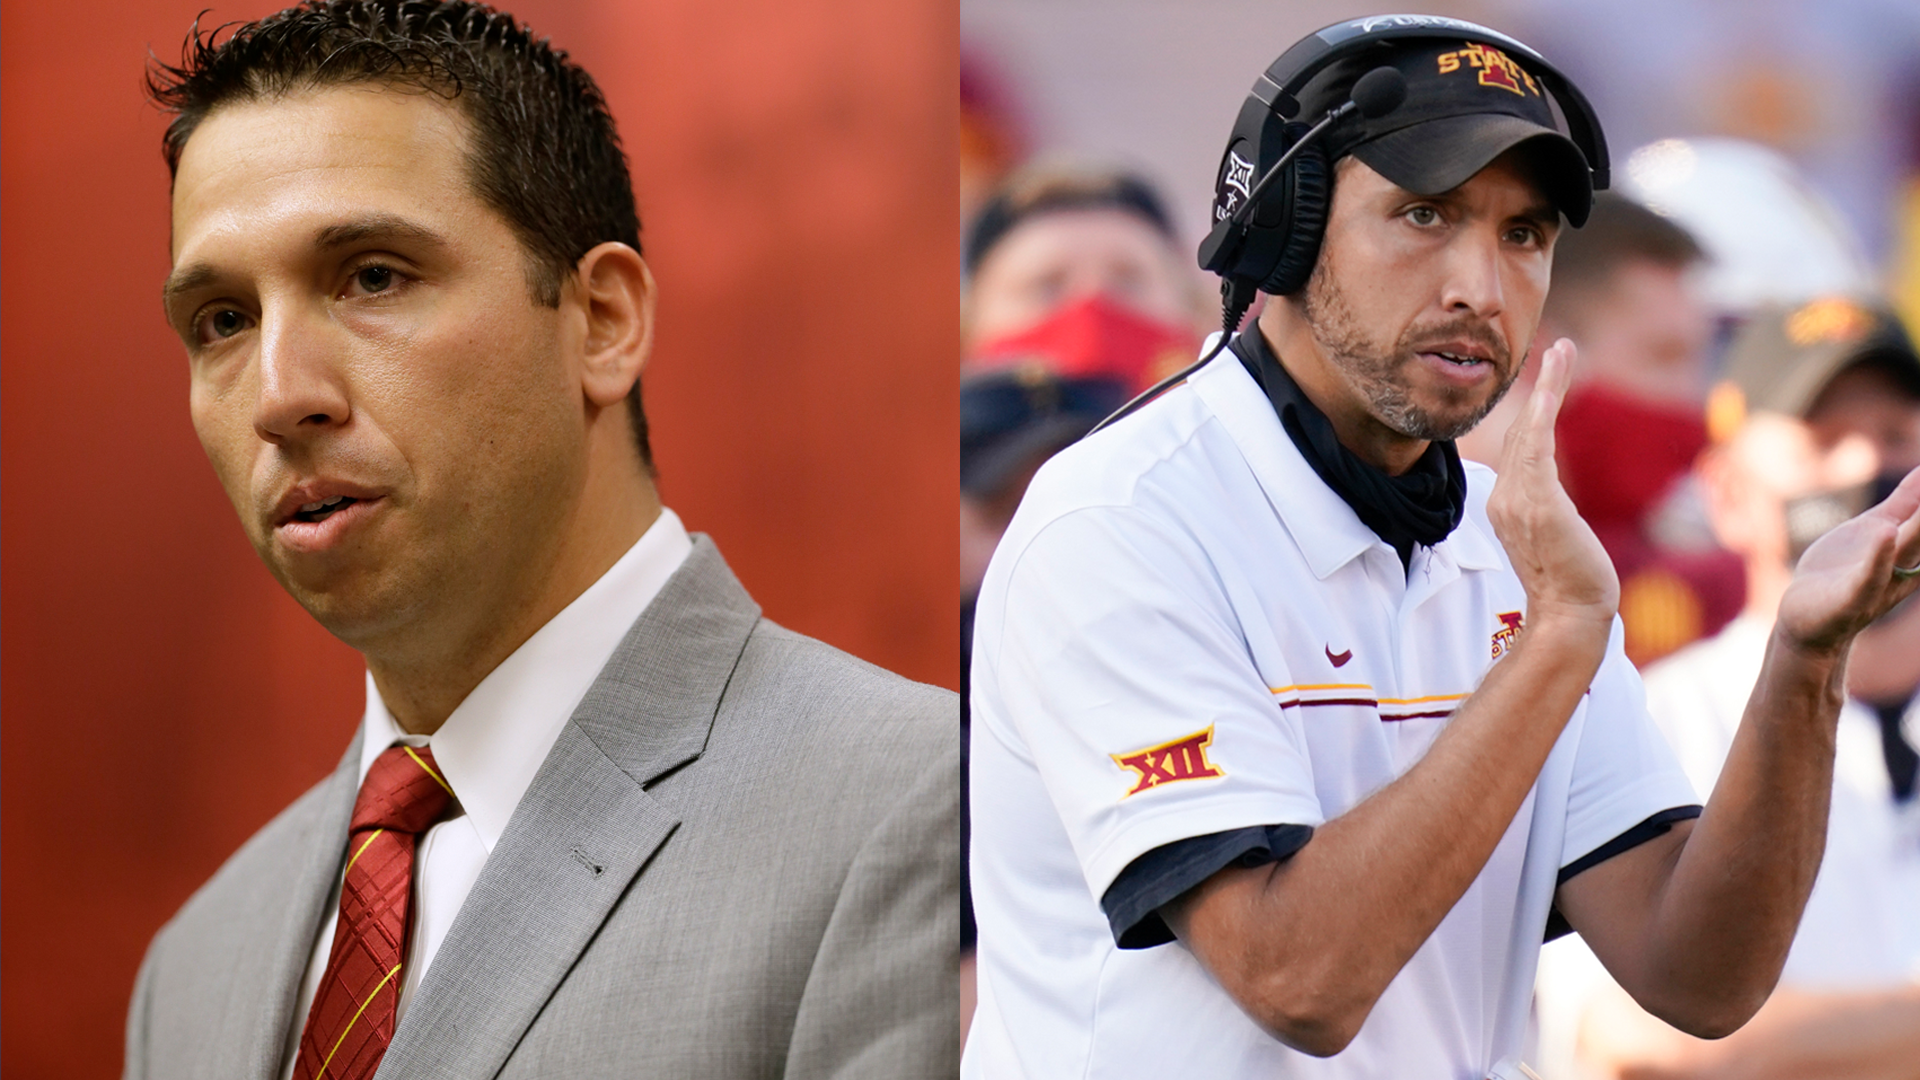 In Year 5 of the Matt Campbell Era, the Cyclones are on the verge of school history: winning a Big 12 Championship Game.